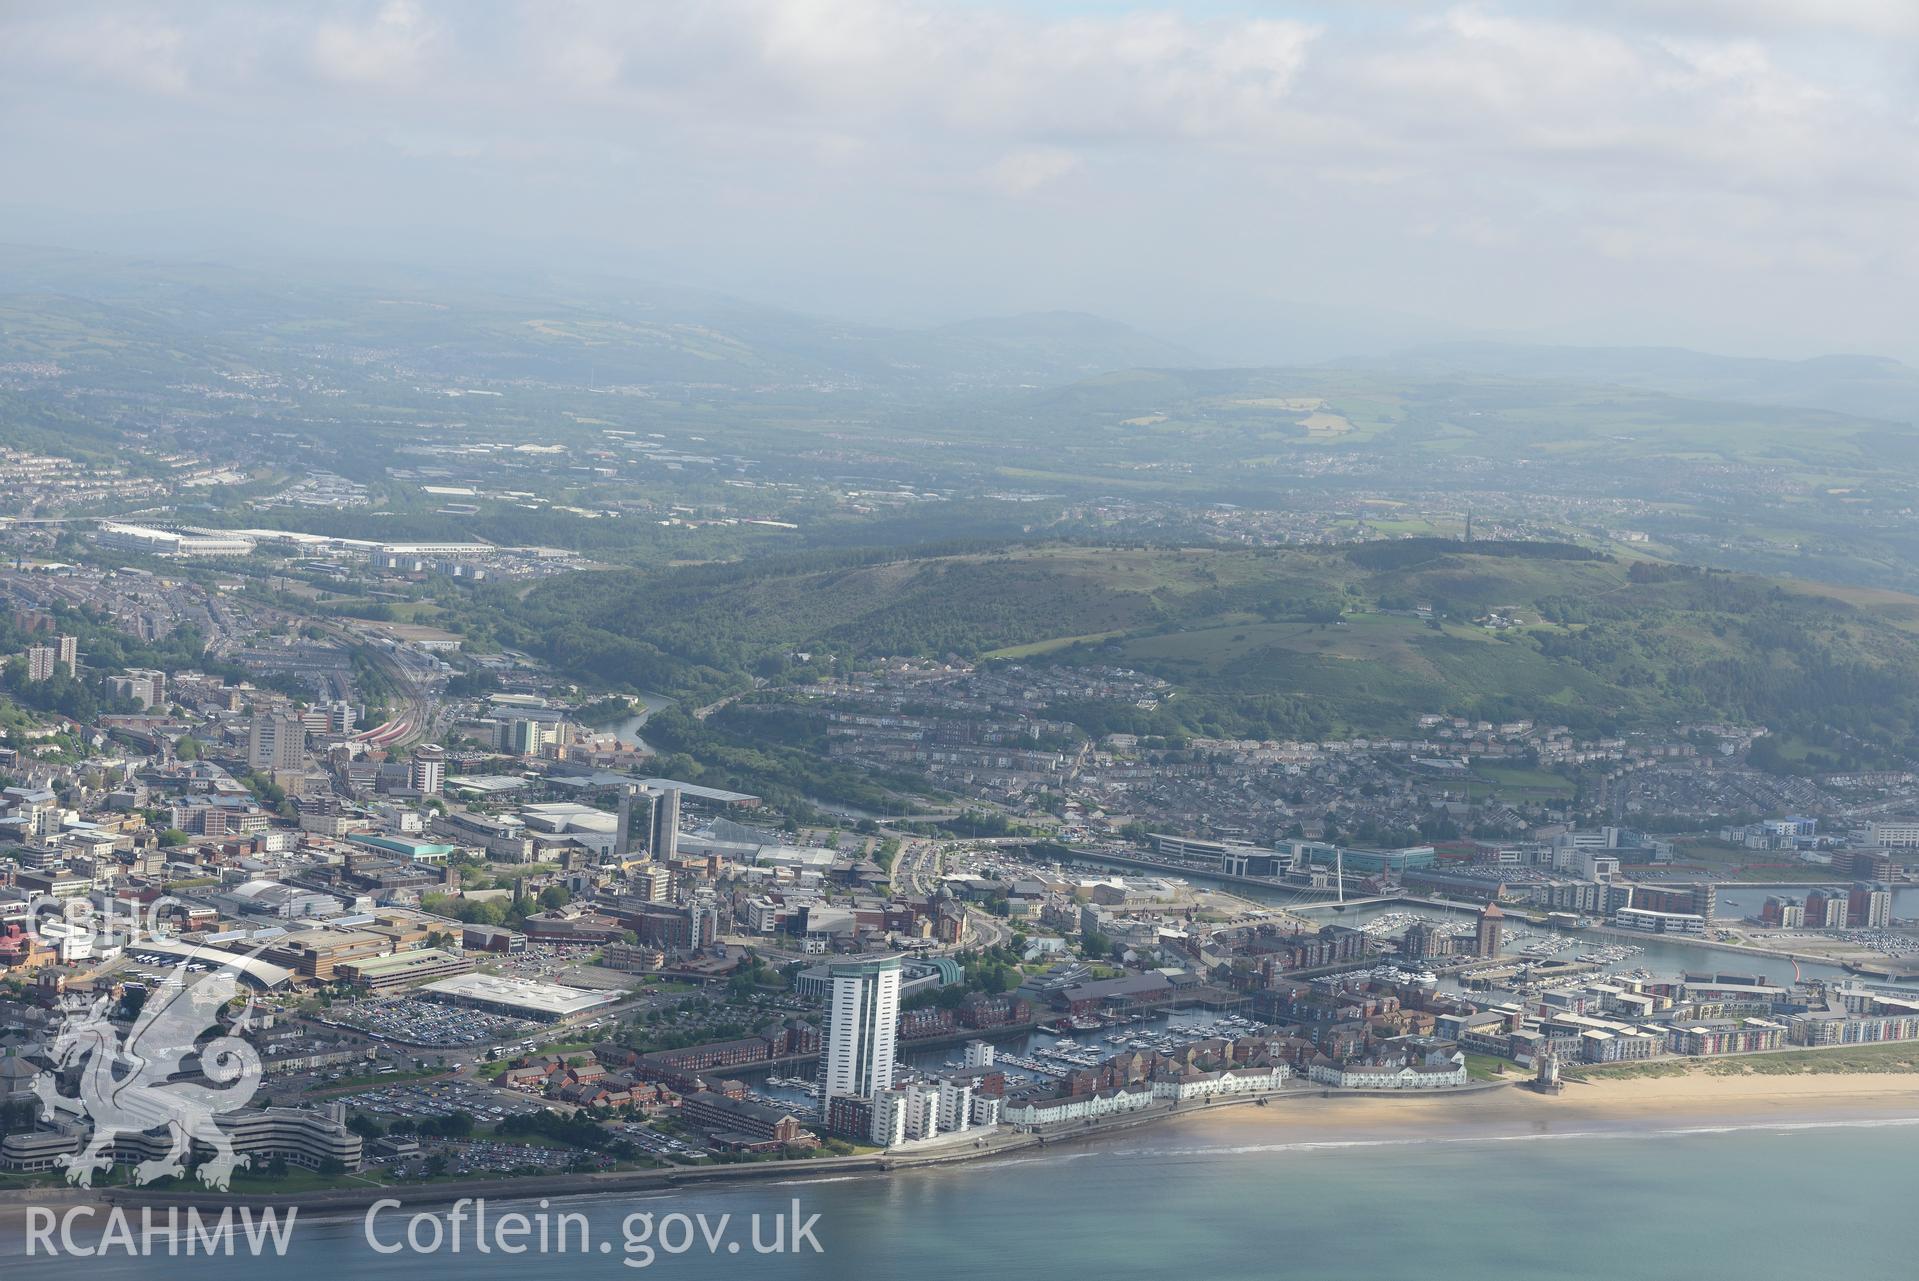 Views of south dock, Meridian Quay and the County Hall in the city of Swansea, taken from Swansea Bay. Oblique aerial photograph taken during the Royal Commission's programme of archaeological aerial reconnaissance by Toby Driver on 19th June 2015.